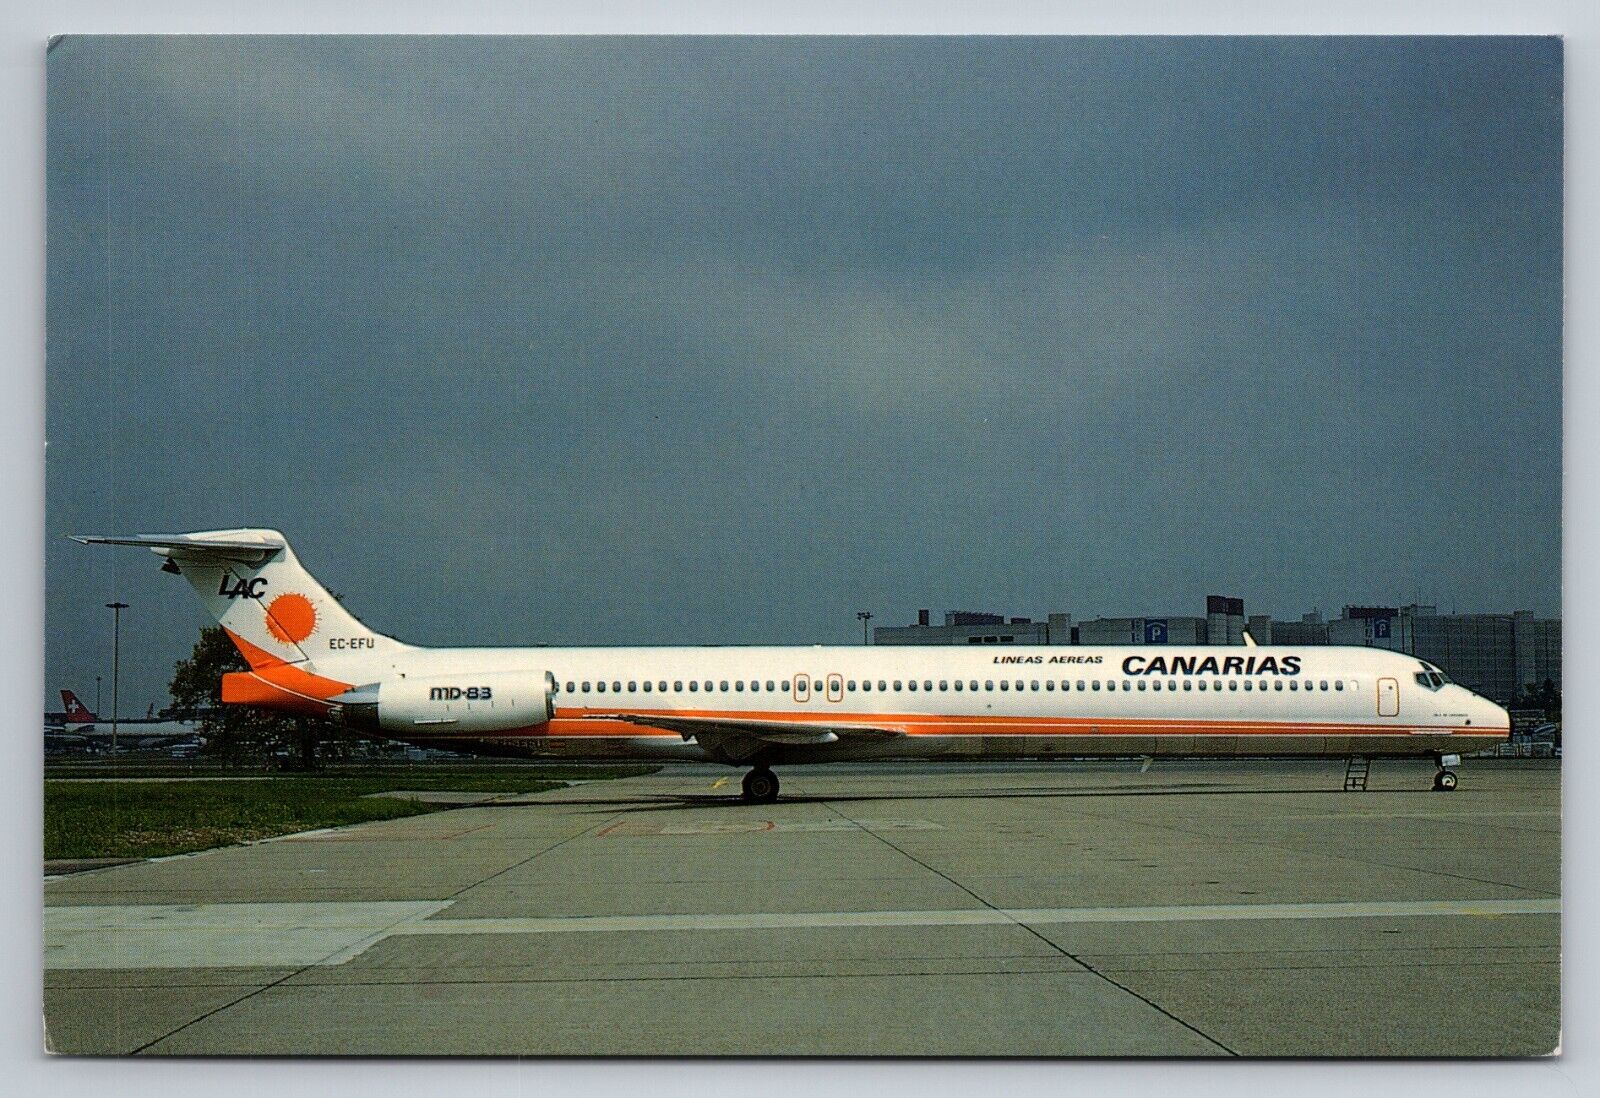 LAC Lineas Aereas Canarias MD-83 Airline Aircraft Postcard